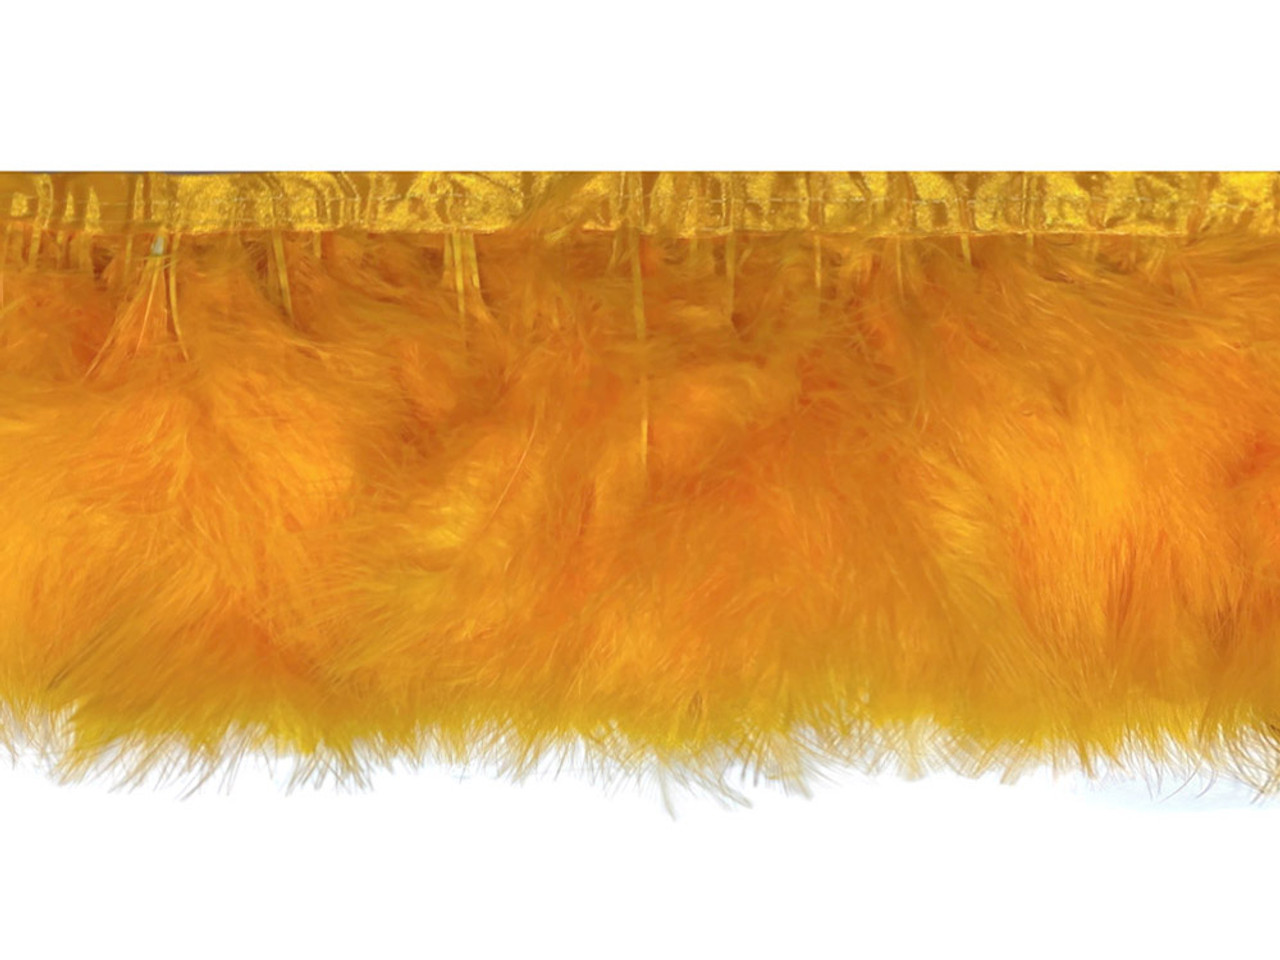 lwingflyer 100pcs Yellow Fluffy Turkey Marabou Feathers 4-6 Inches for  Crafts Dream Catcher Fringe Trim